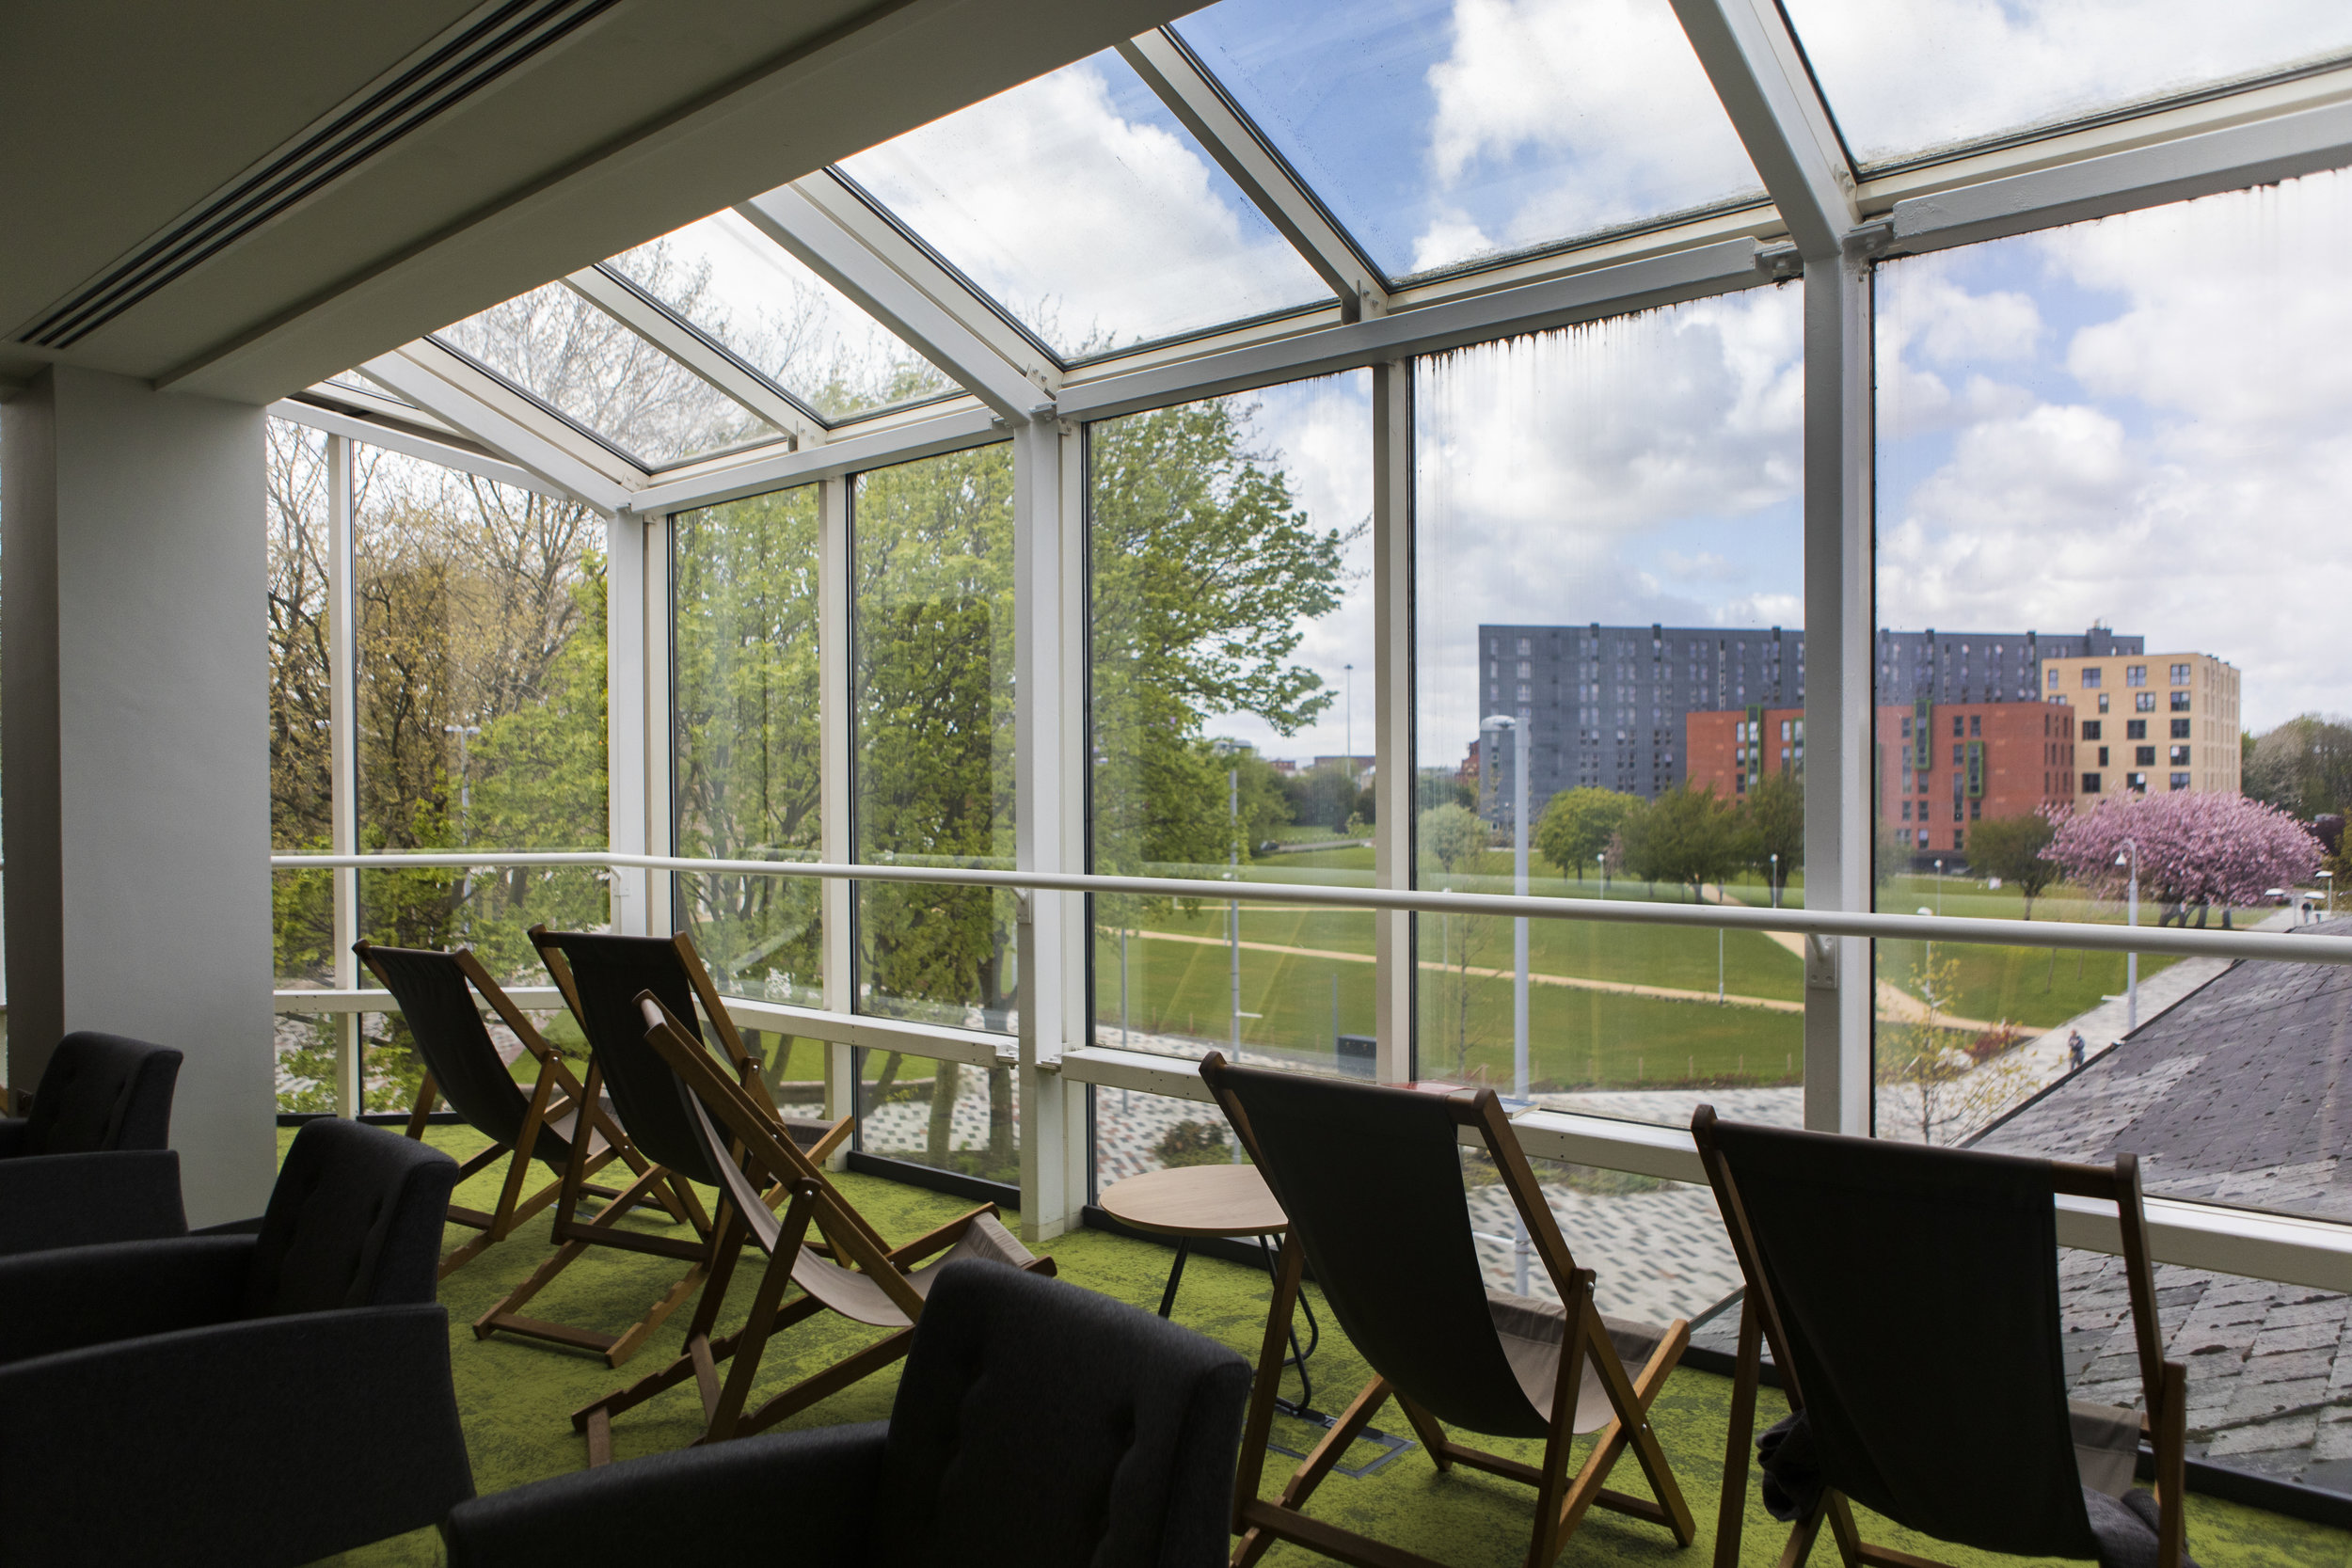 Relaxed study space with deck chairs inside Clifford Whitworth Library